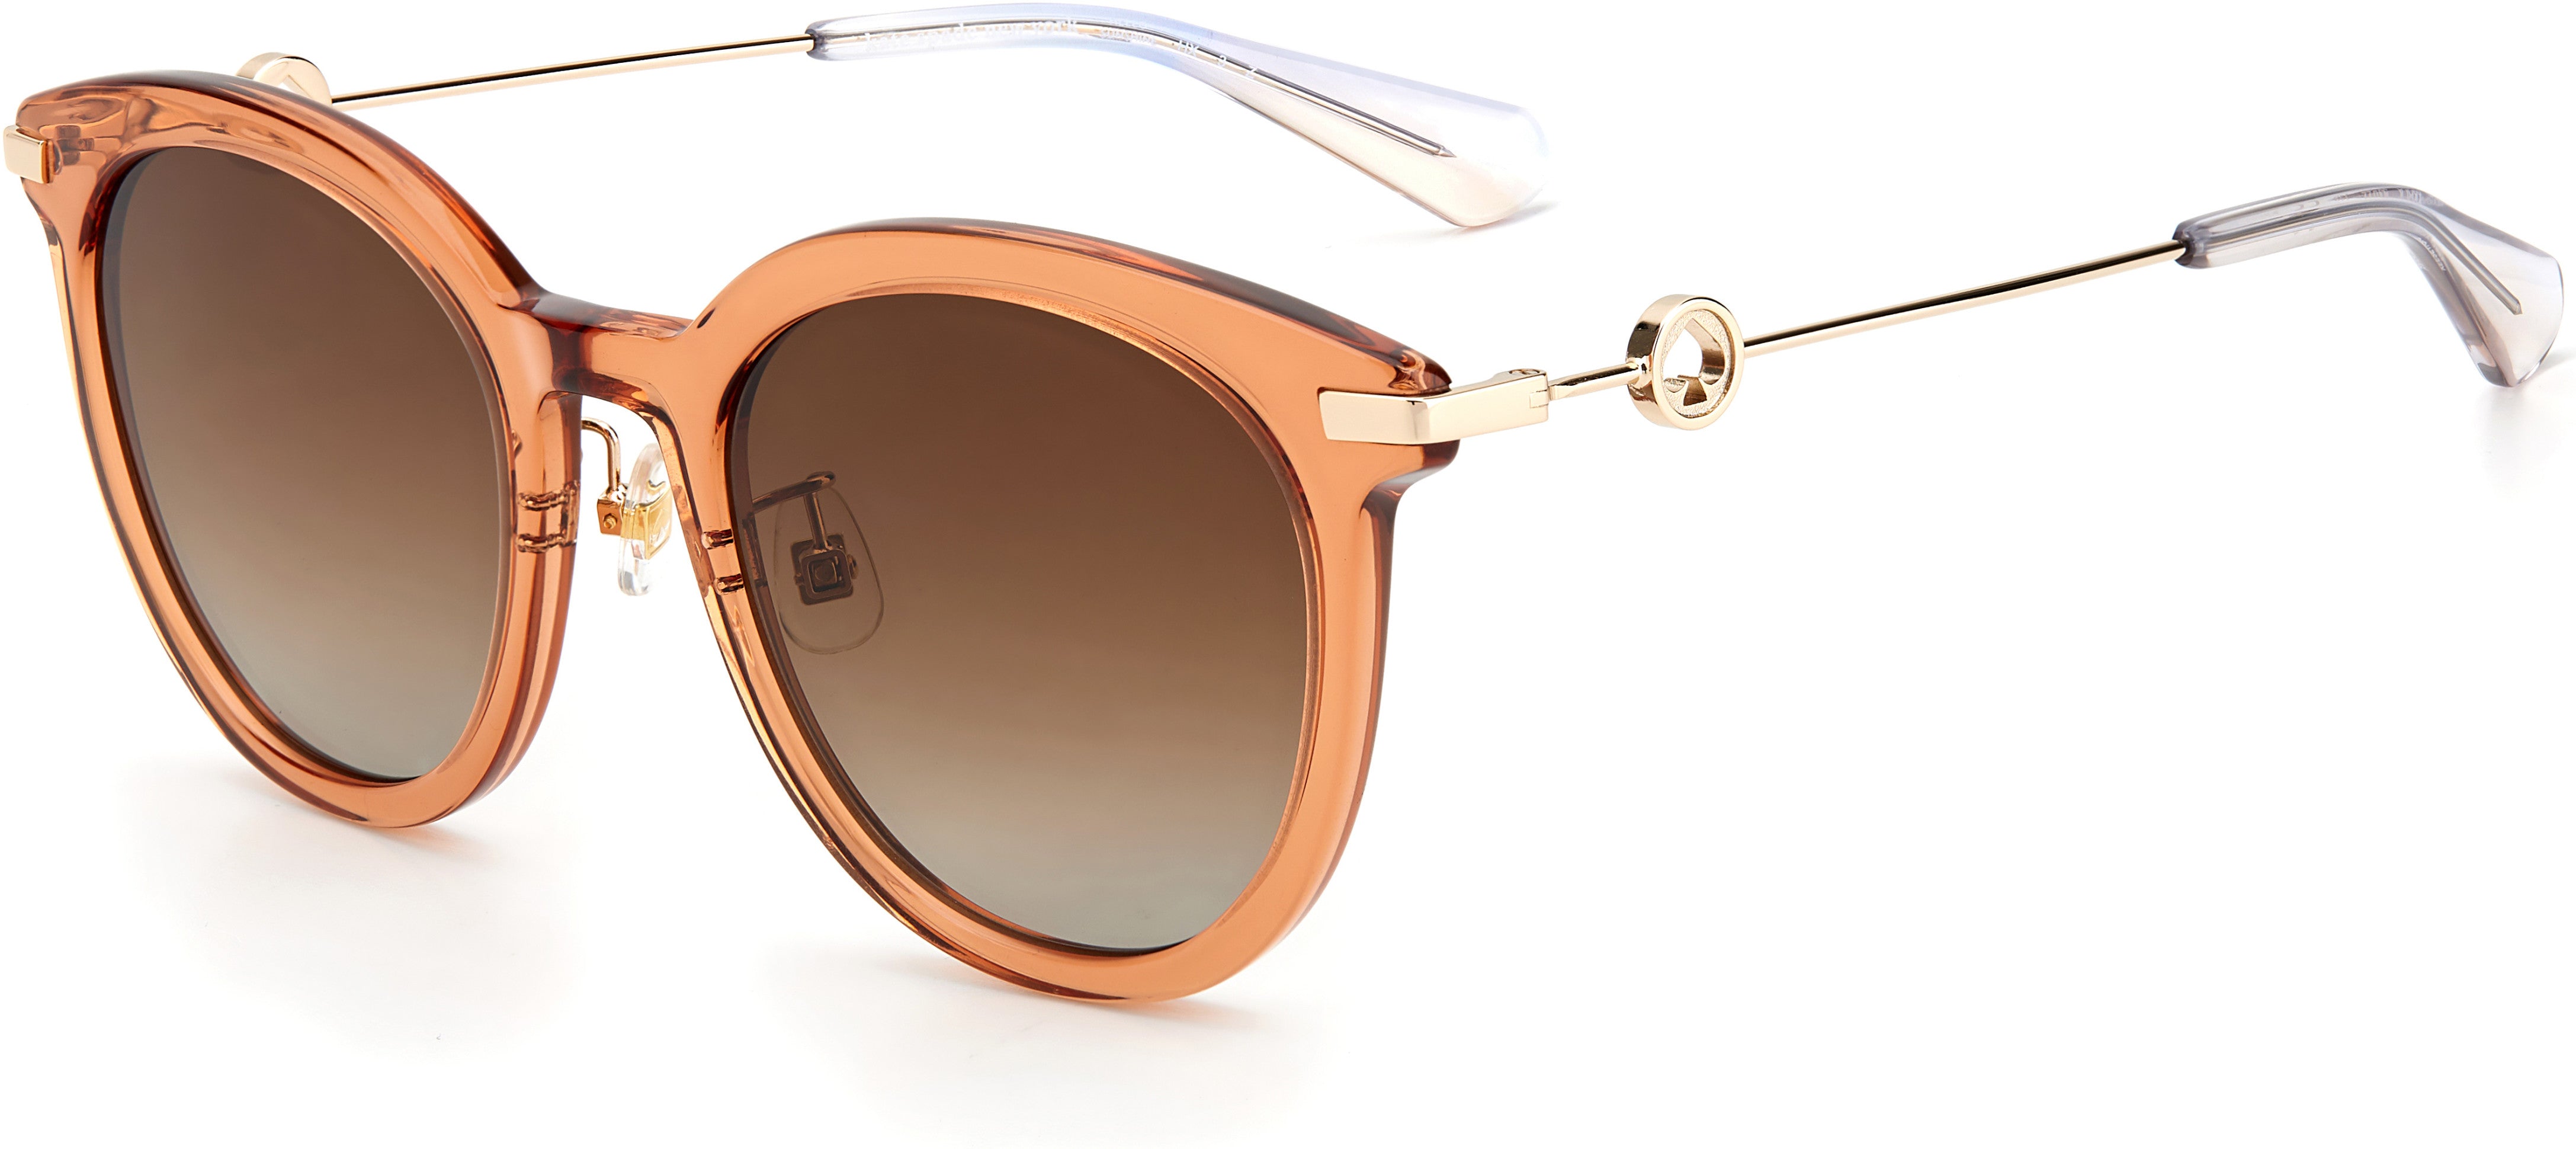 Kate Spade Keesey/G/S Oval Modified Sunglasses 009Q-009Q  Brown (LA Brown Gradient Polz)